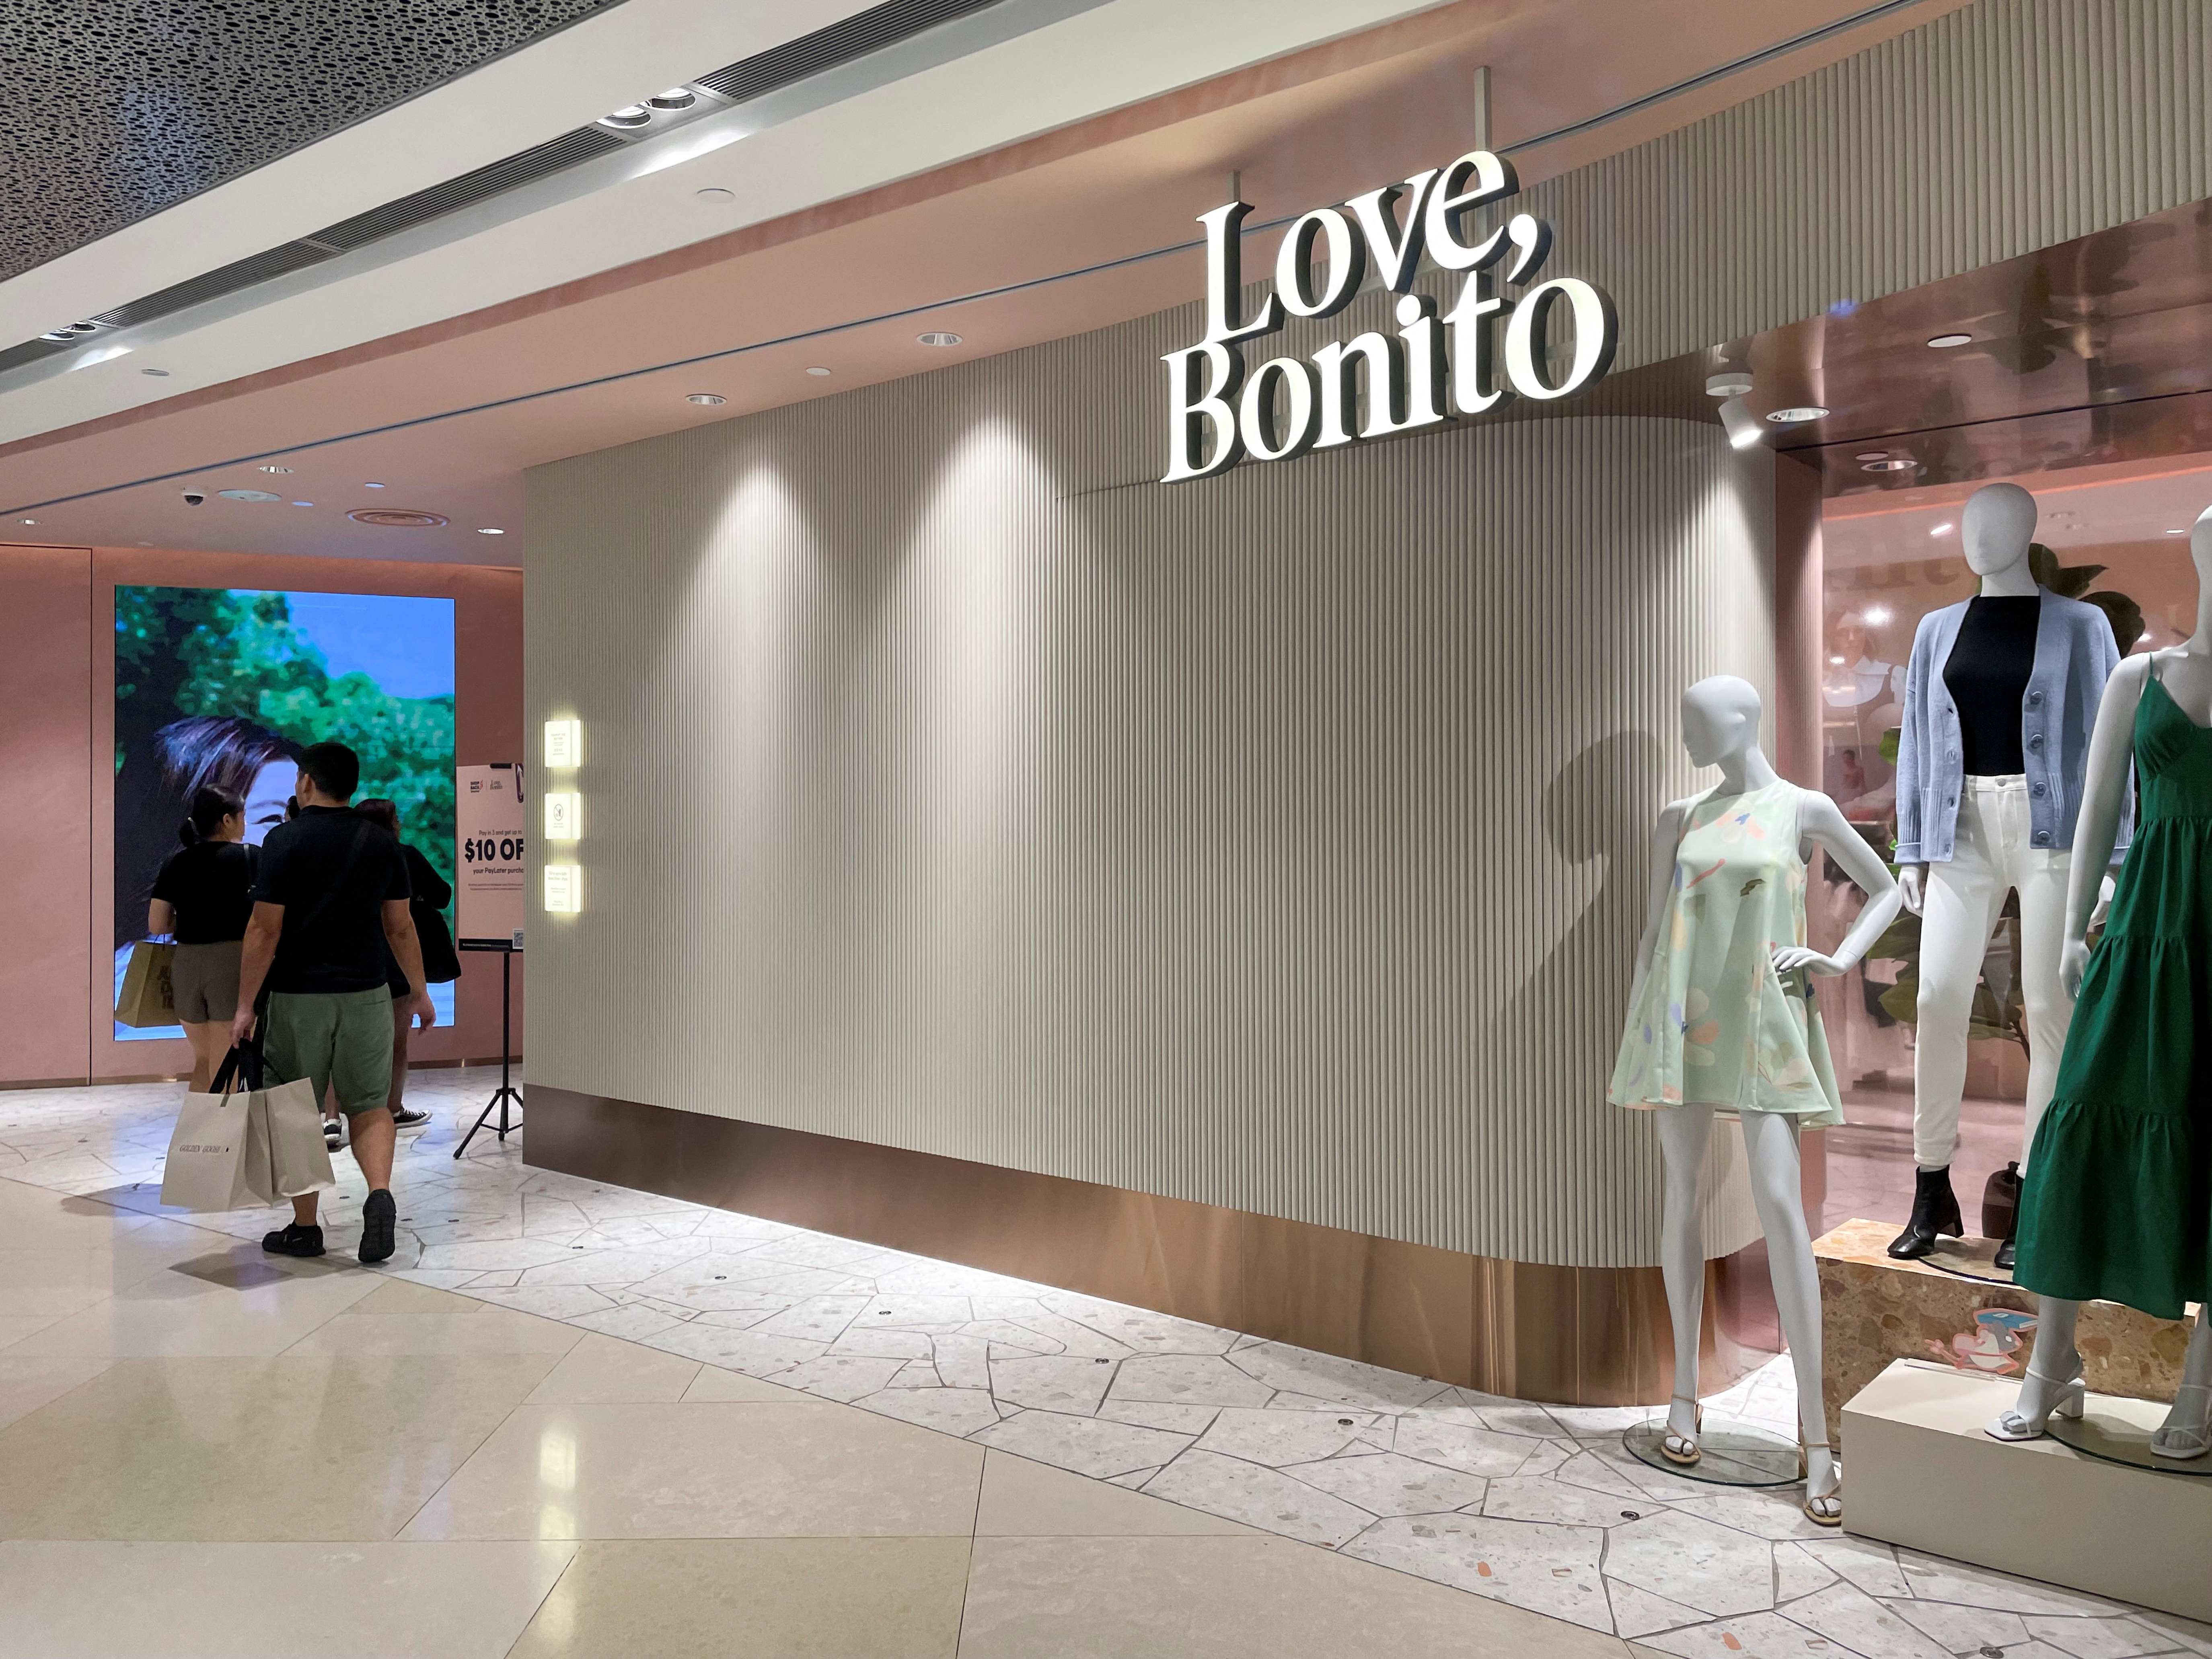 Singapore's Love, Bonito brand owner to open first U.S. store in 2023, eyes  IPO